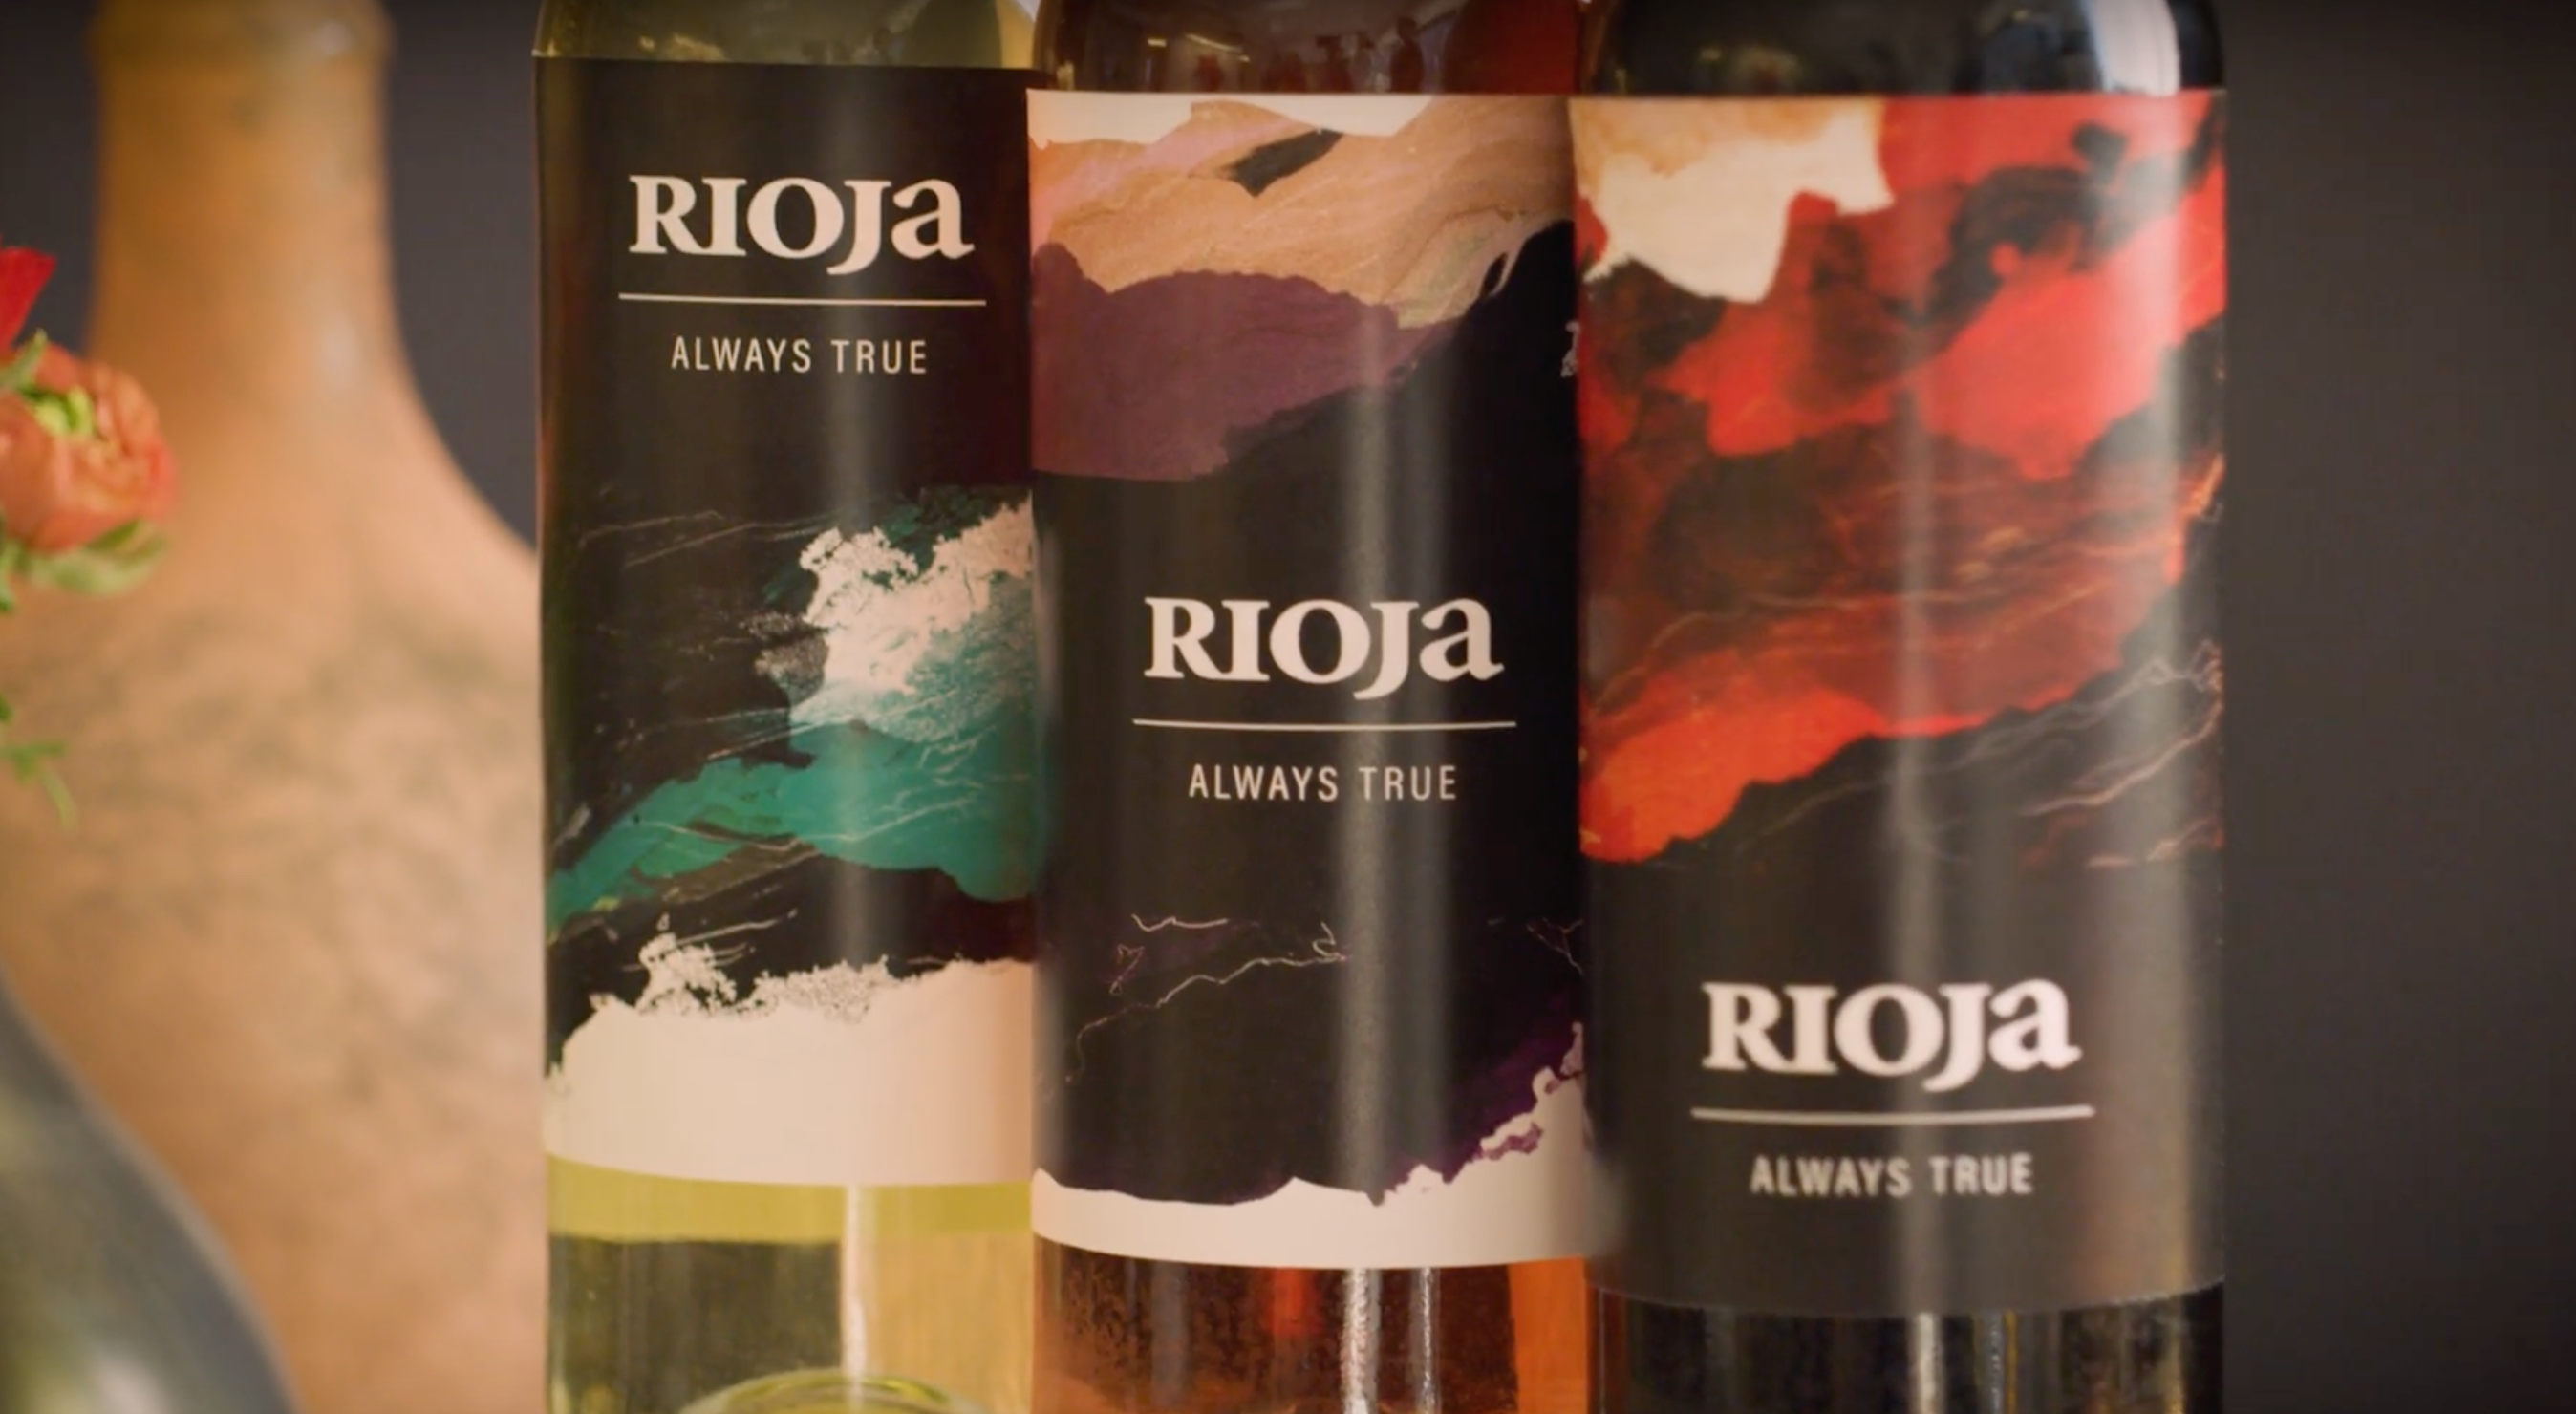 Rioja Wines Commercial Airs on Top Chef